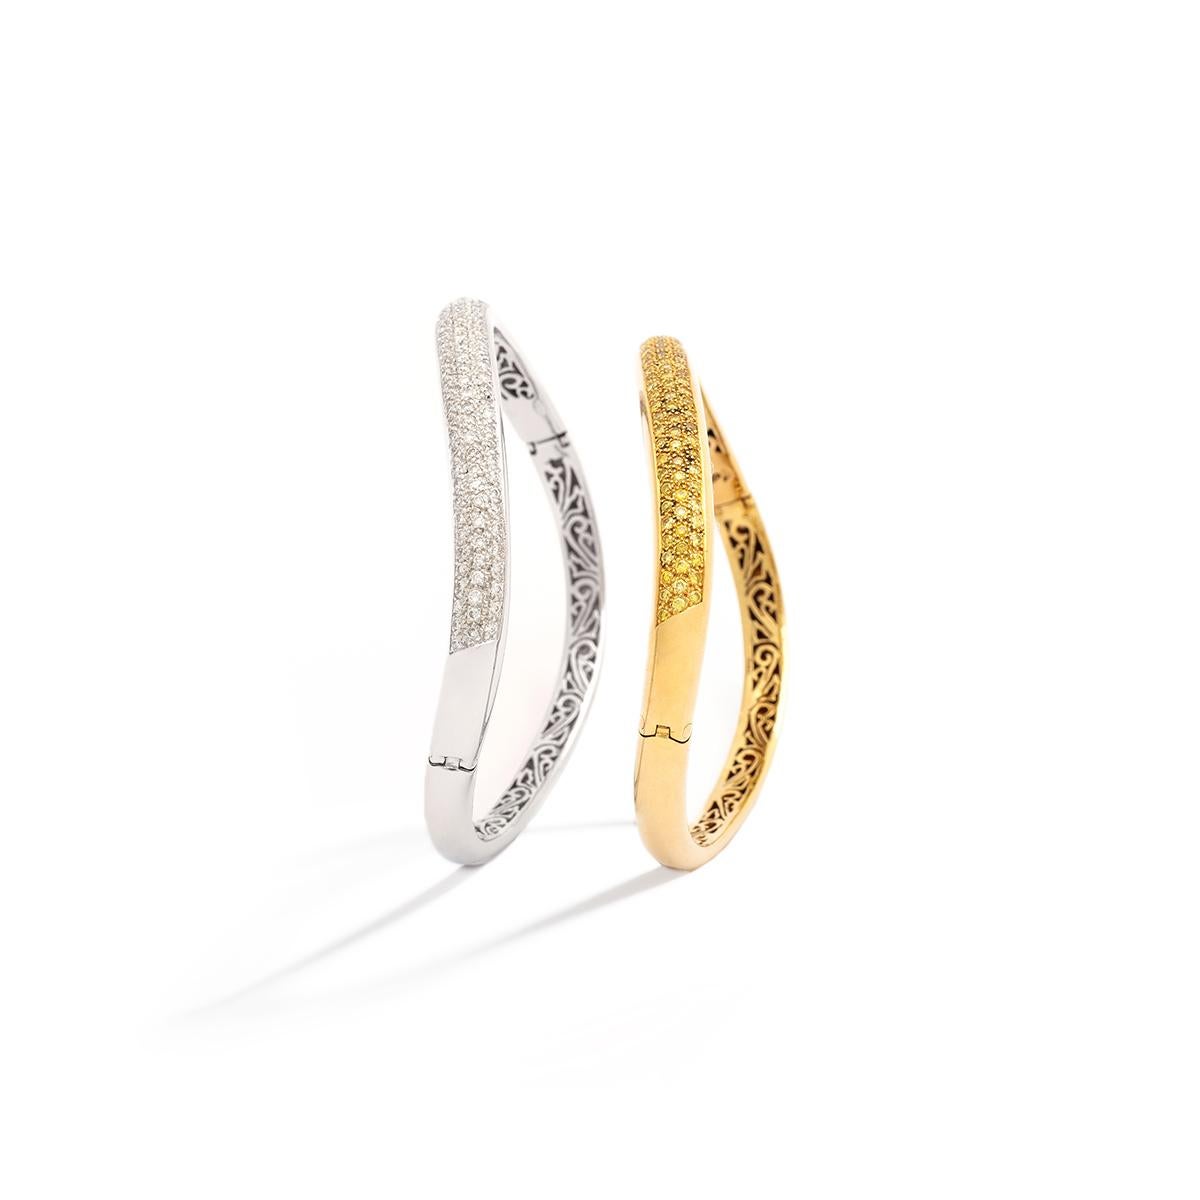 Aesthetic Movement Pair of Bracelets Diamond white and yellow Gold For Sale